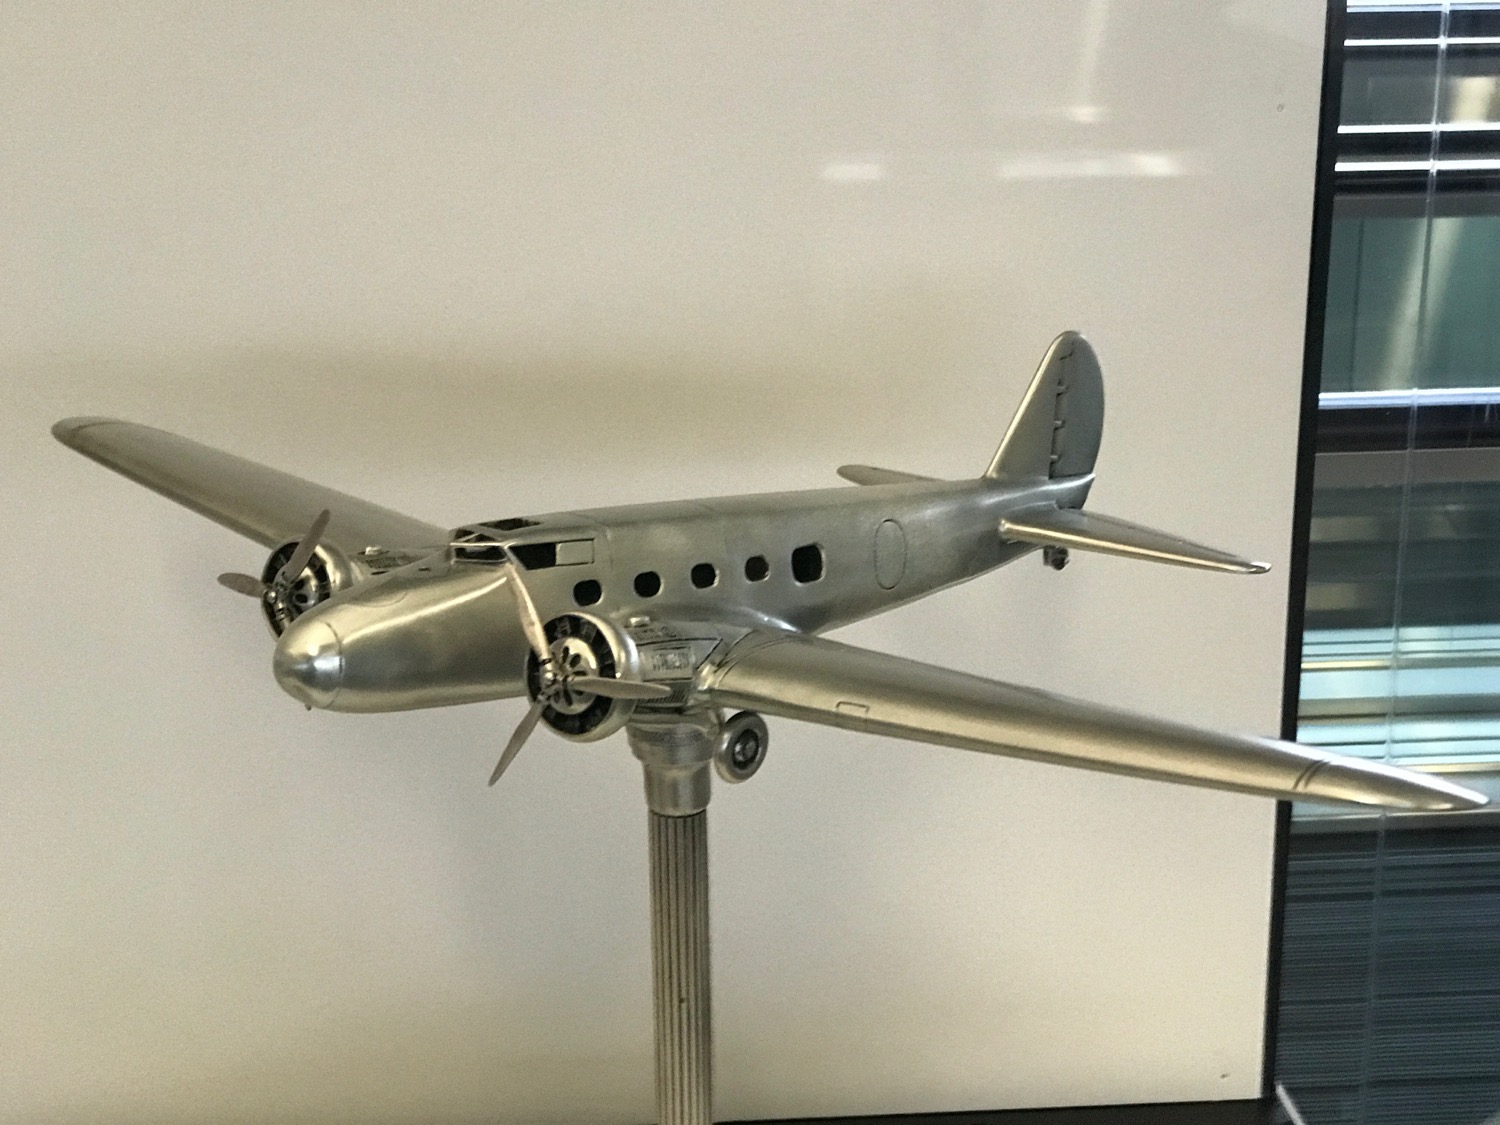 a model airplane on a stand